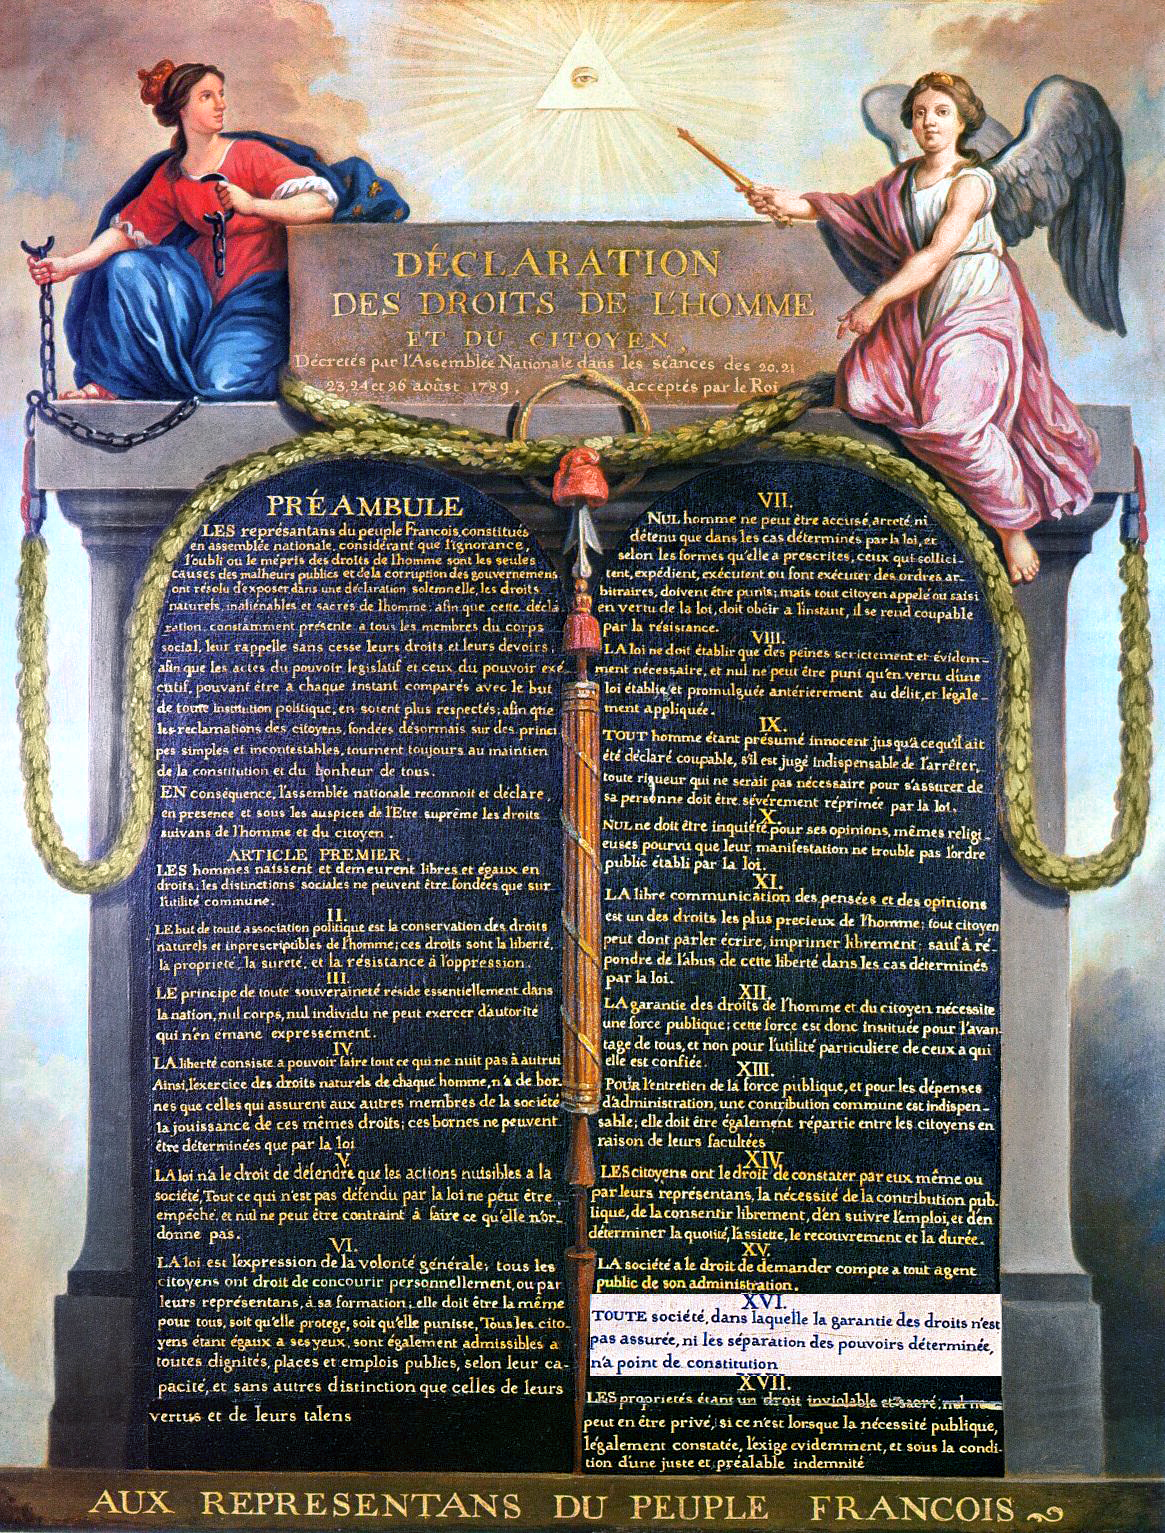 Original text in French of the commented Declaration